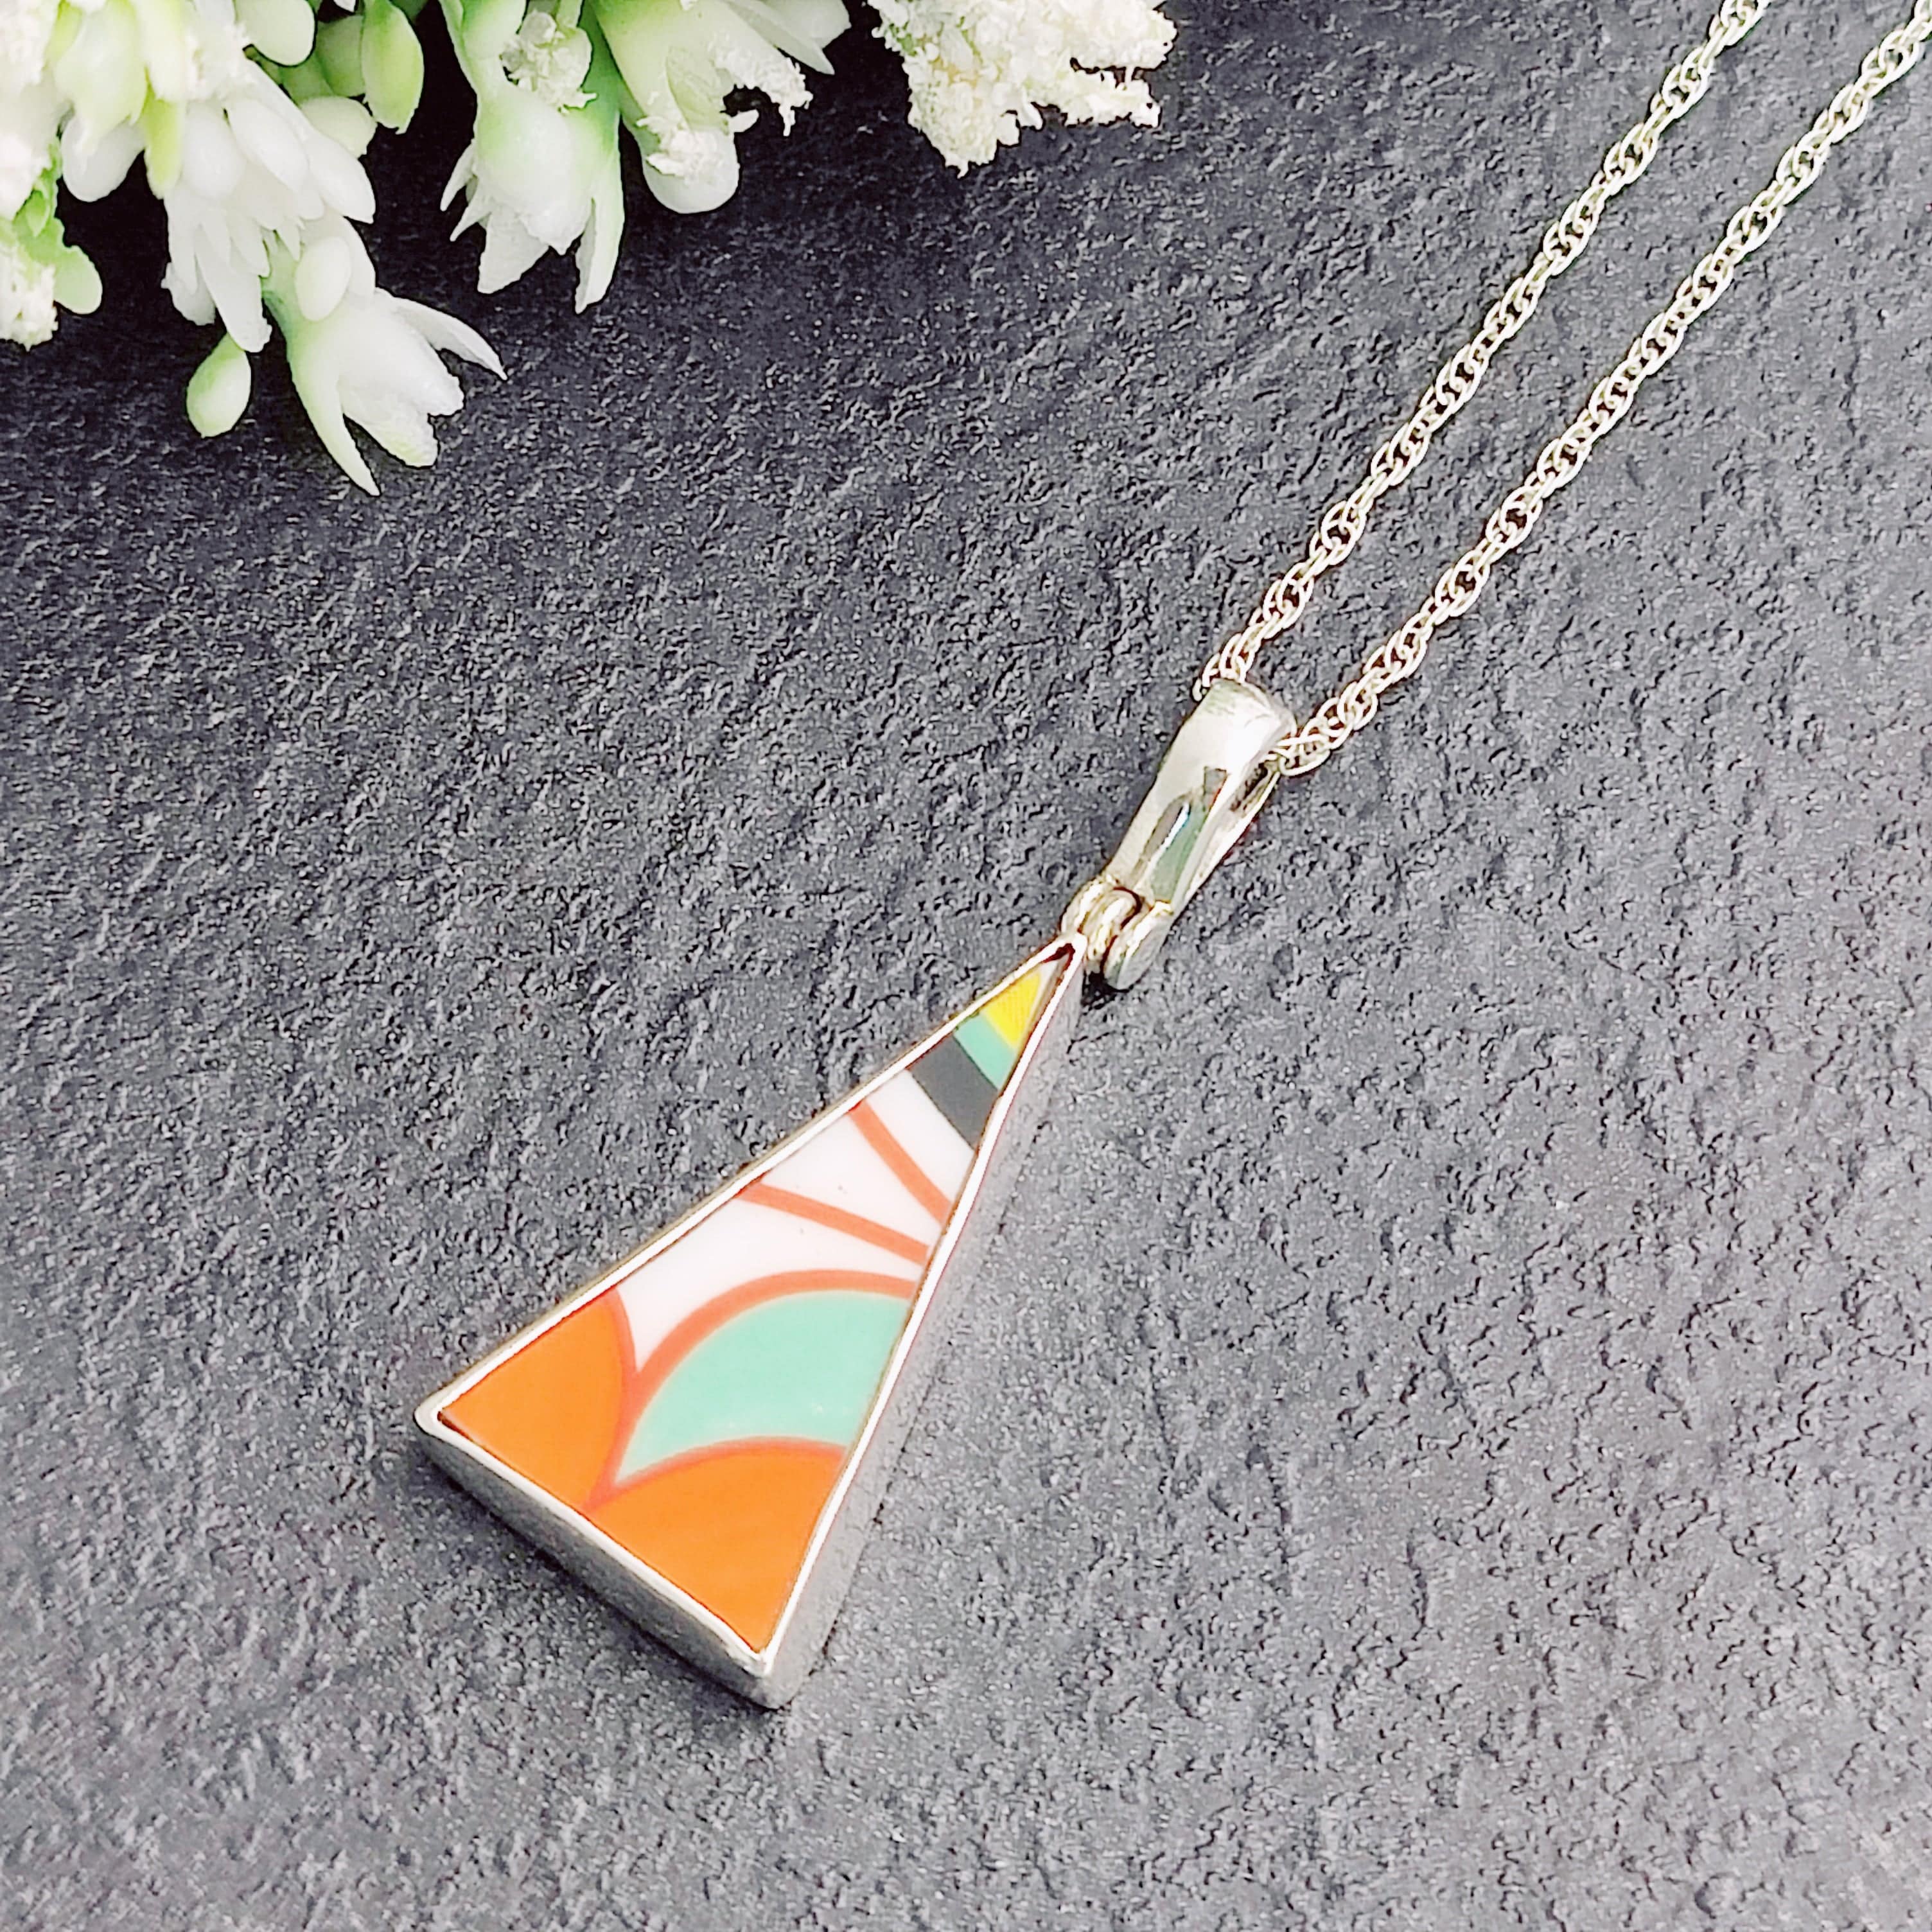 Hepburn and Hughes Art Deco Pendant | Triangular Clarice Cliff necklace | 37mm long | Two options | Sterling Silver